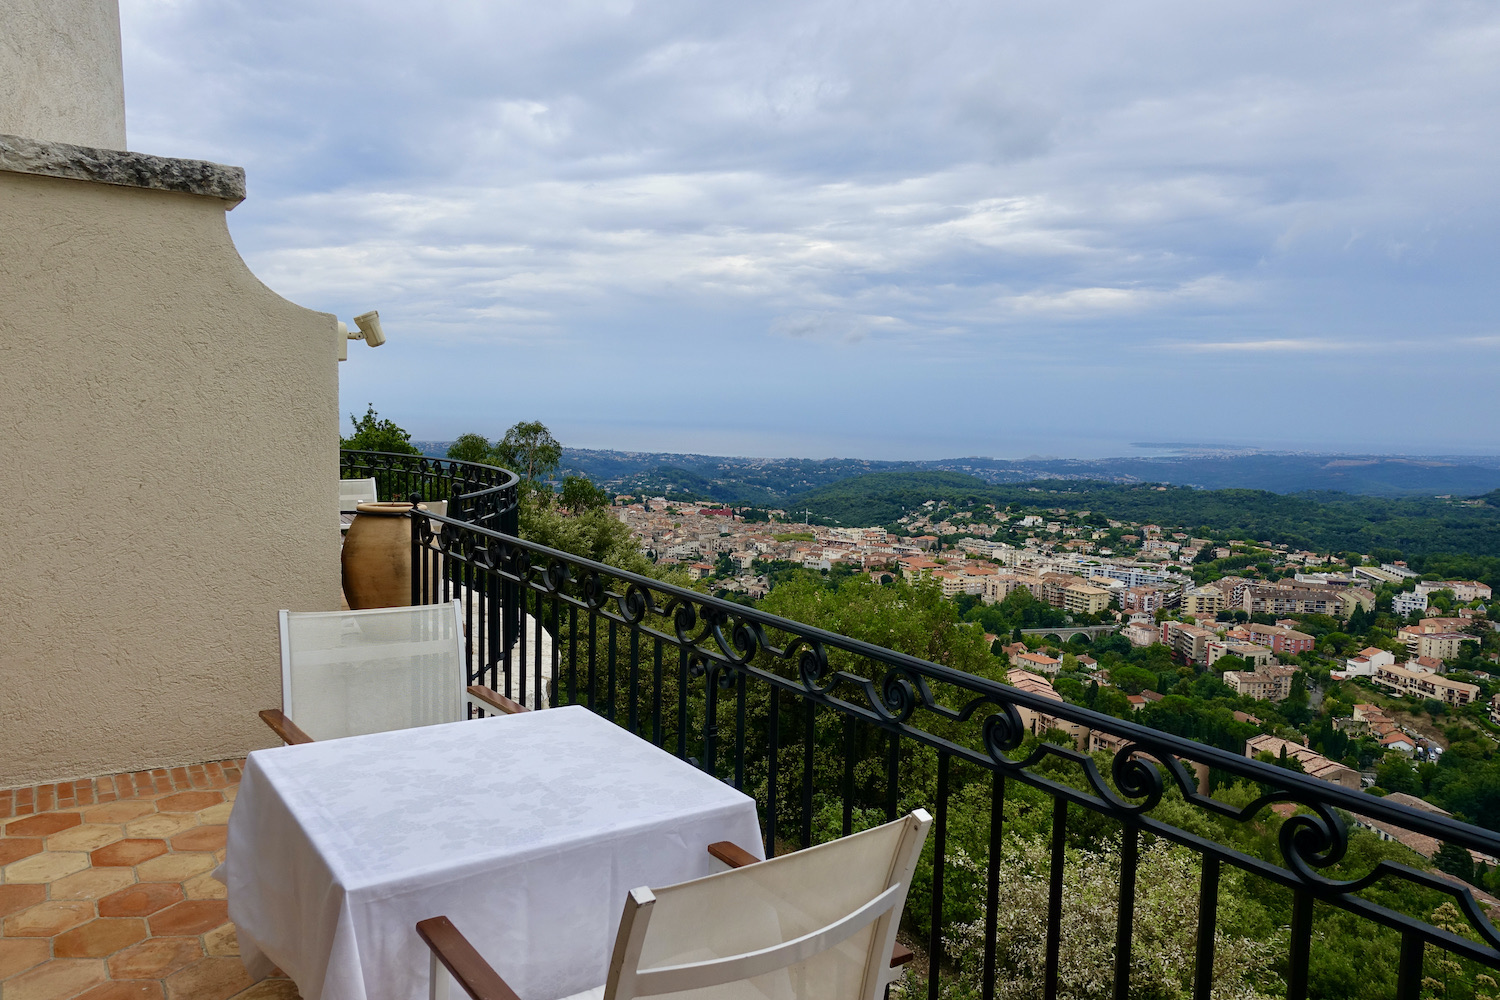 Château Saint-Martin in the French Riviera hills, view of Superior Junior Suite